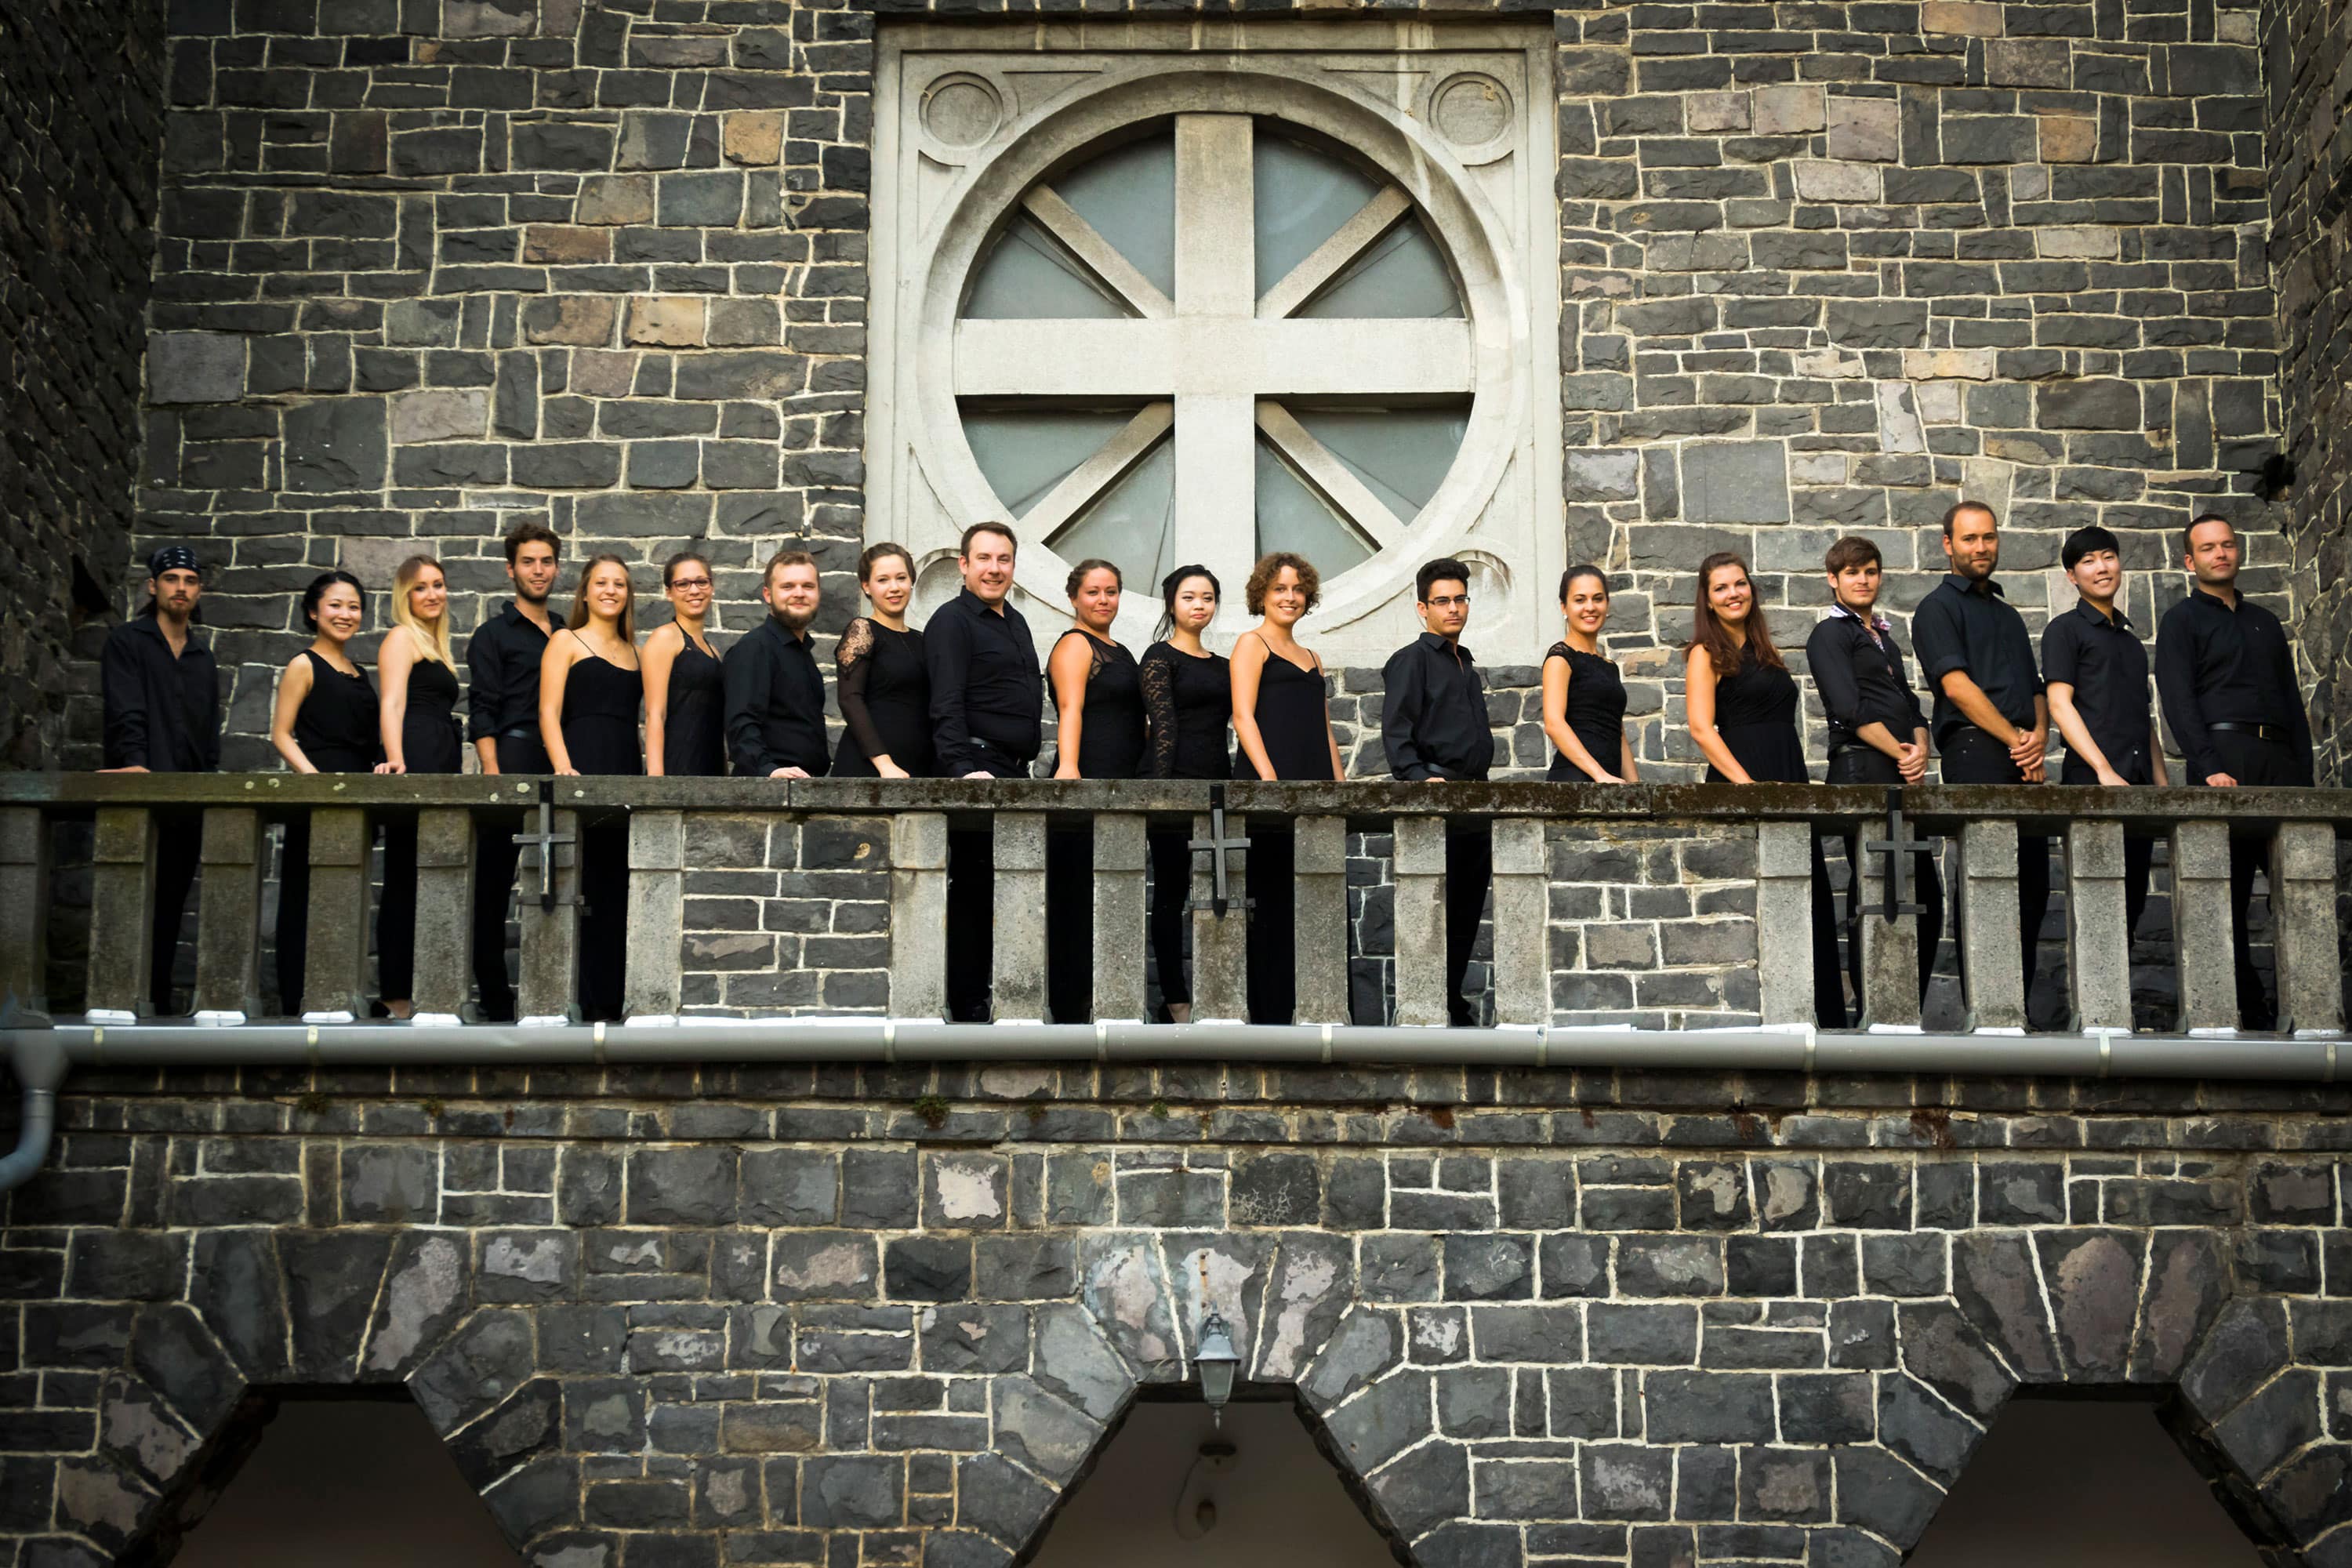 Camerata Pelsonore group photo https://todaymediaproduction.com